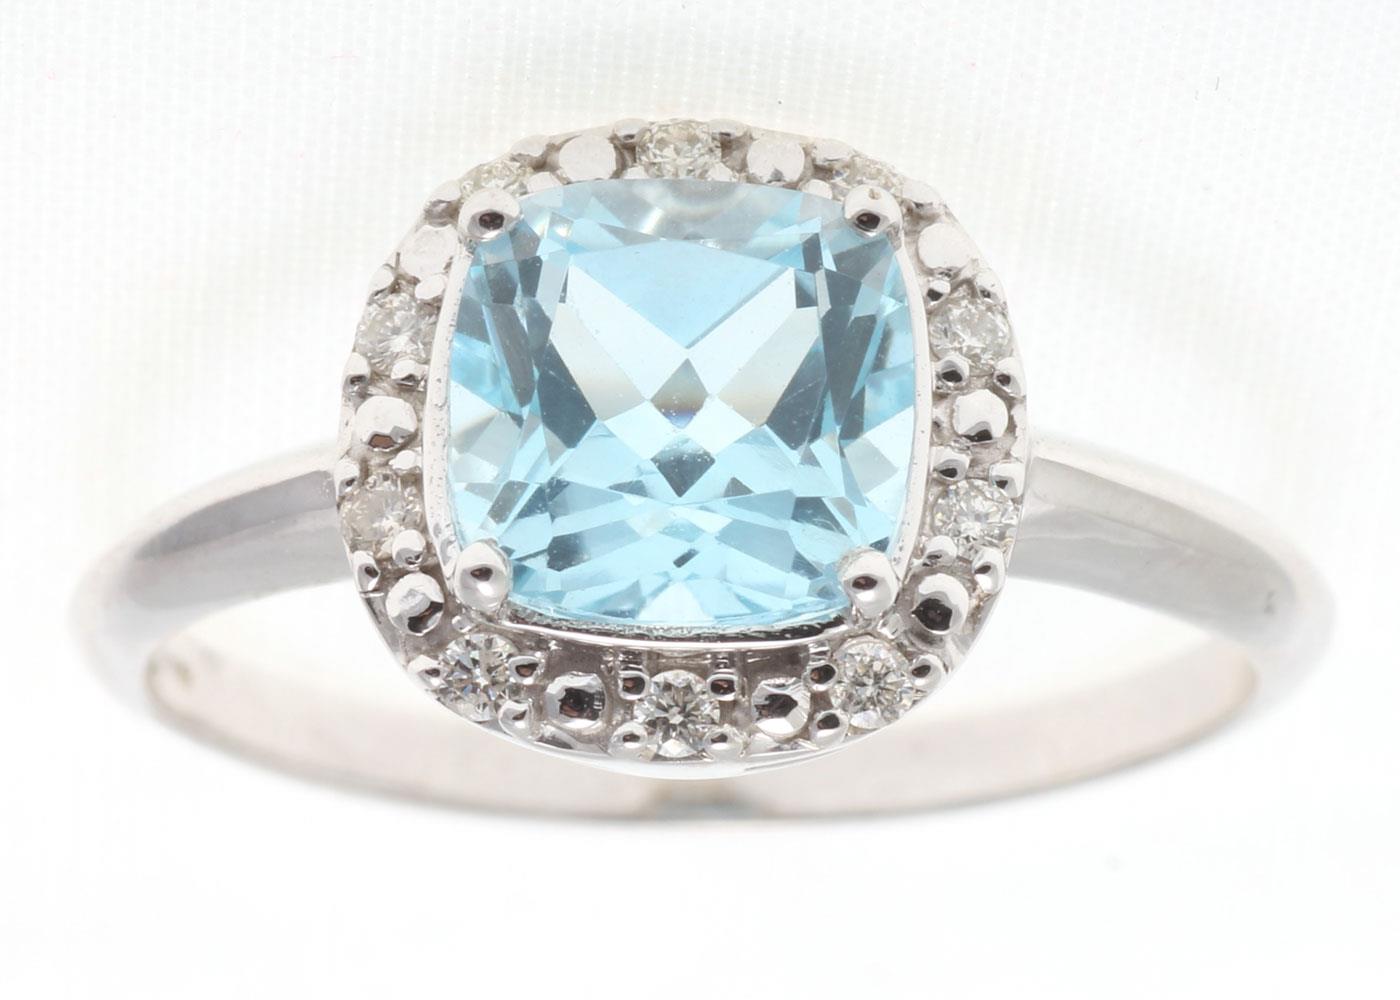 9ct White Gold Diamond And Blue Topaz Ring (BT1.79) 0.10 Carats - Valued By GIE £1,920.00 - A - Image 6 of 10